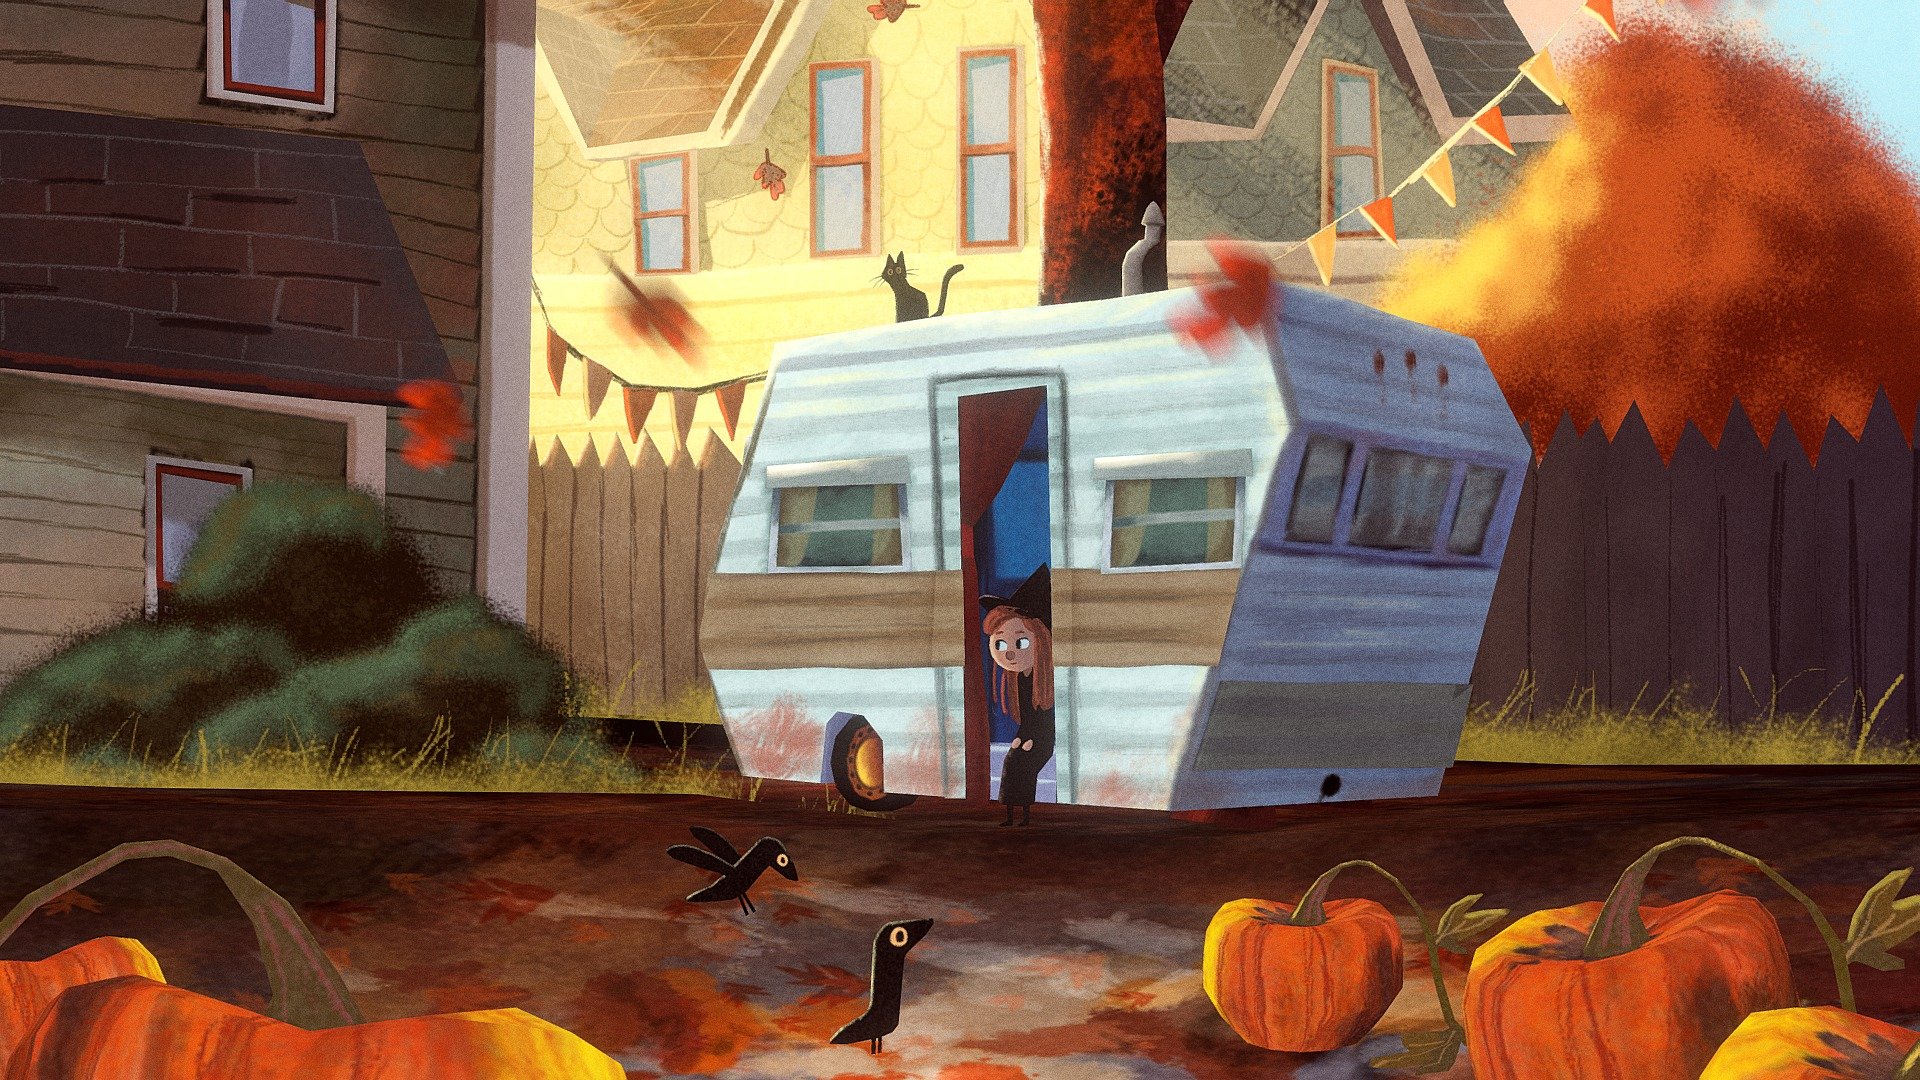 Based on an Izzy Burton's illustration

&ldquo;Catrina’s mother was not going to have a witch under her roof so Catrina had taken up residence in the caravan in the back yard. It was a little rusty and if it rained particularly hard the water would squeeze it’s way in and drip down onto the old Lino floor, but it wasn’t all that bad. Catrina liked the independence. She learnt to cook for herself and borrowed hundreds of books from the library to teach herself all the necessary things that adults do. And she made friends too, with next doors cat and a few crows. A few weeks later the pumpkins started showing up, just a few at first but every time Catrina’s mother tried to cut them back more grew in their place. Catrina thought the pumpkins made the yard look warm and cosy, and she was glad they didn’t let her mother stop them from growing and thriving